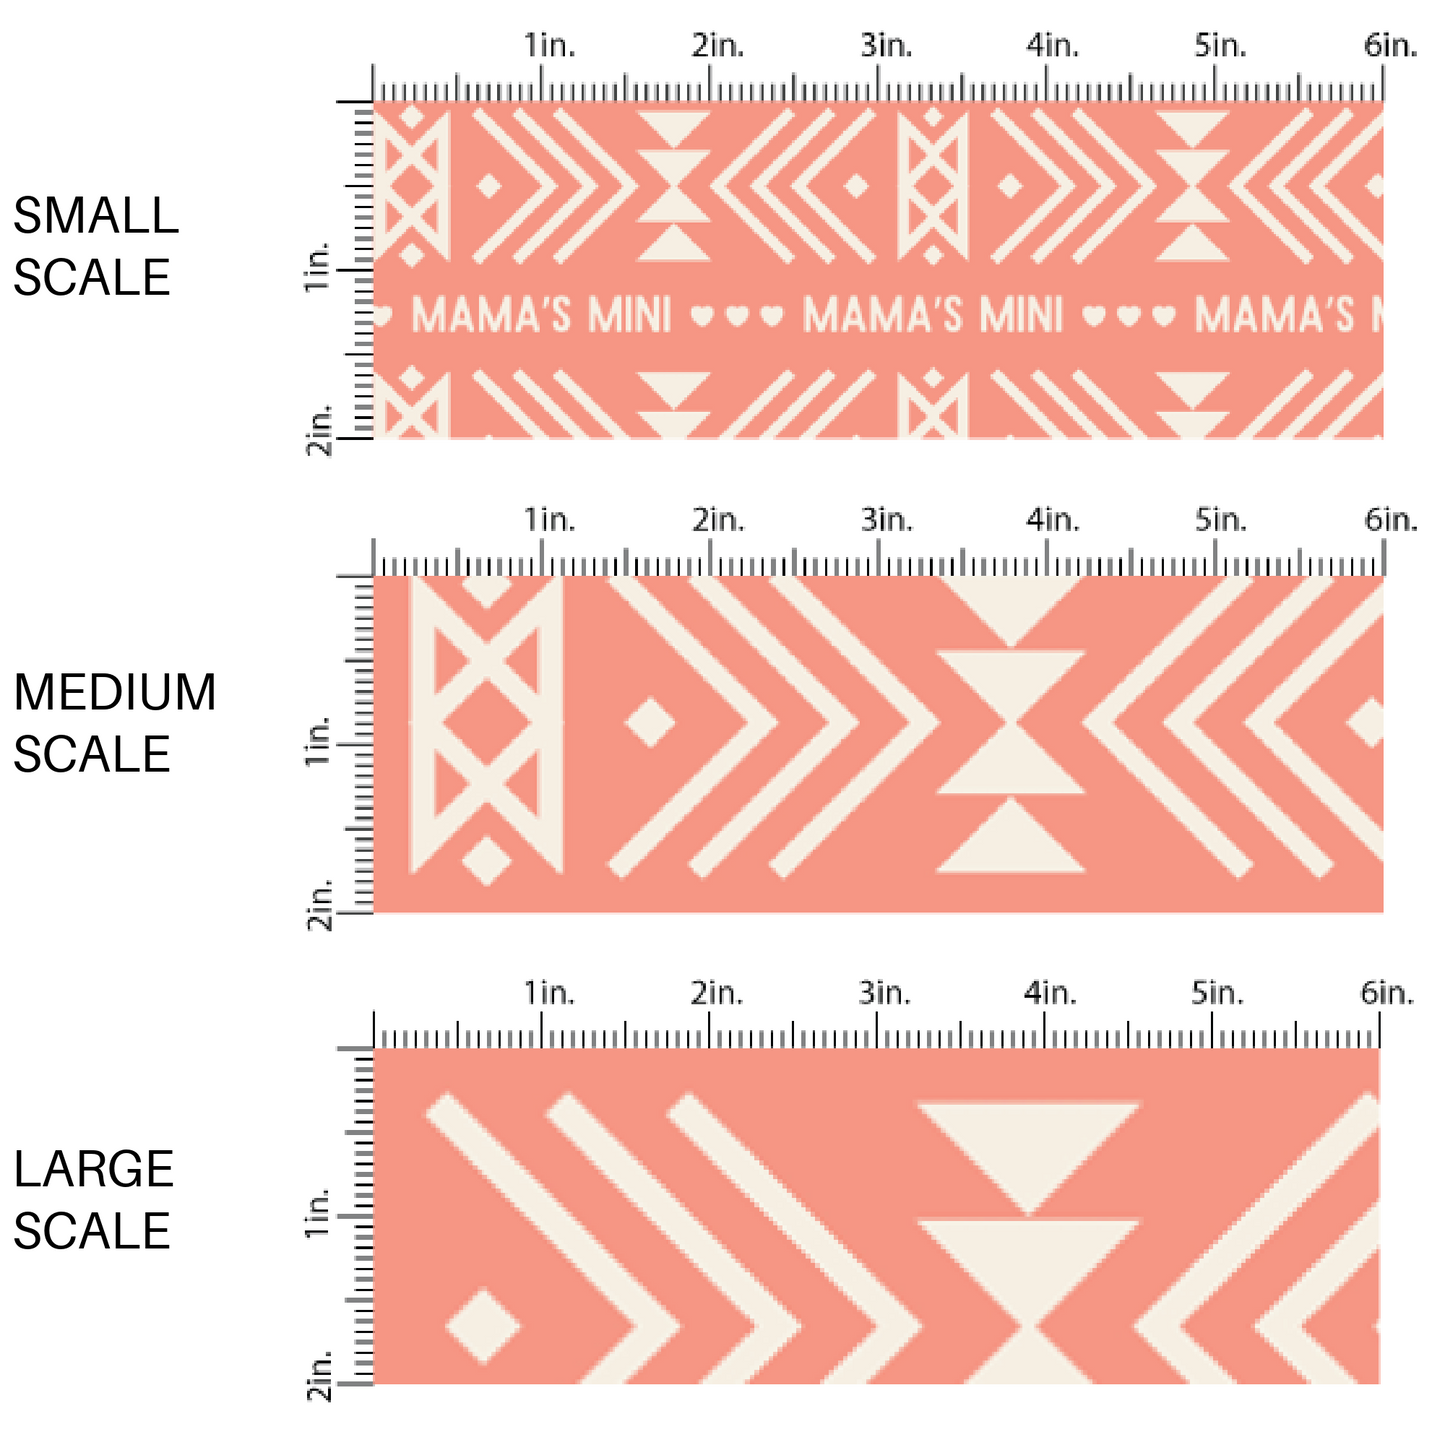 "Mama's Mini" Aztec Print on Coral Fabric by the Yard scaled image guide.